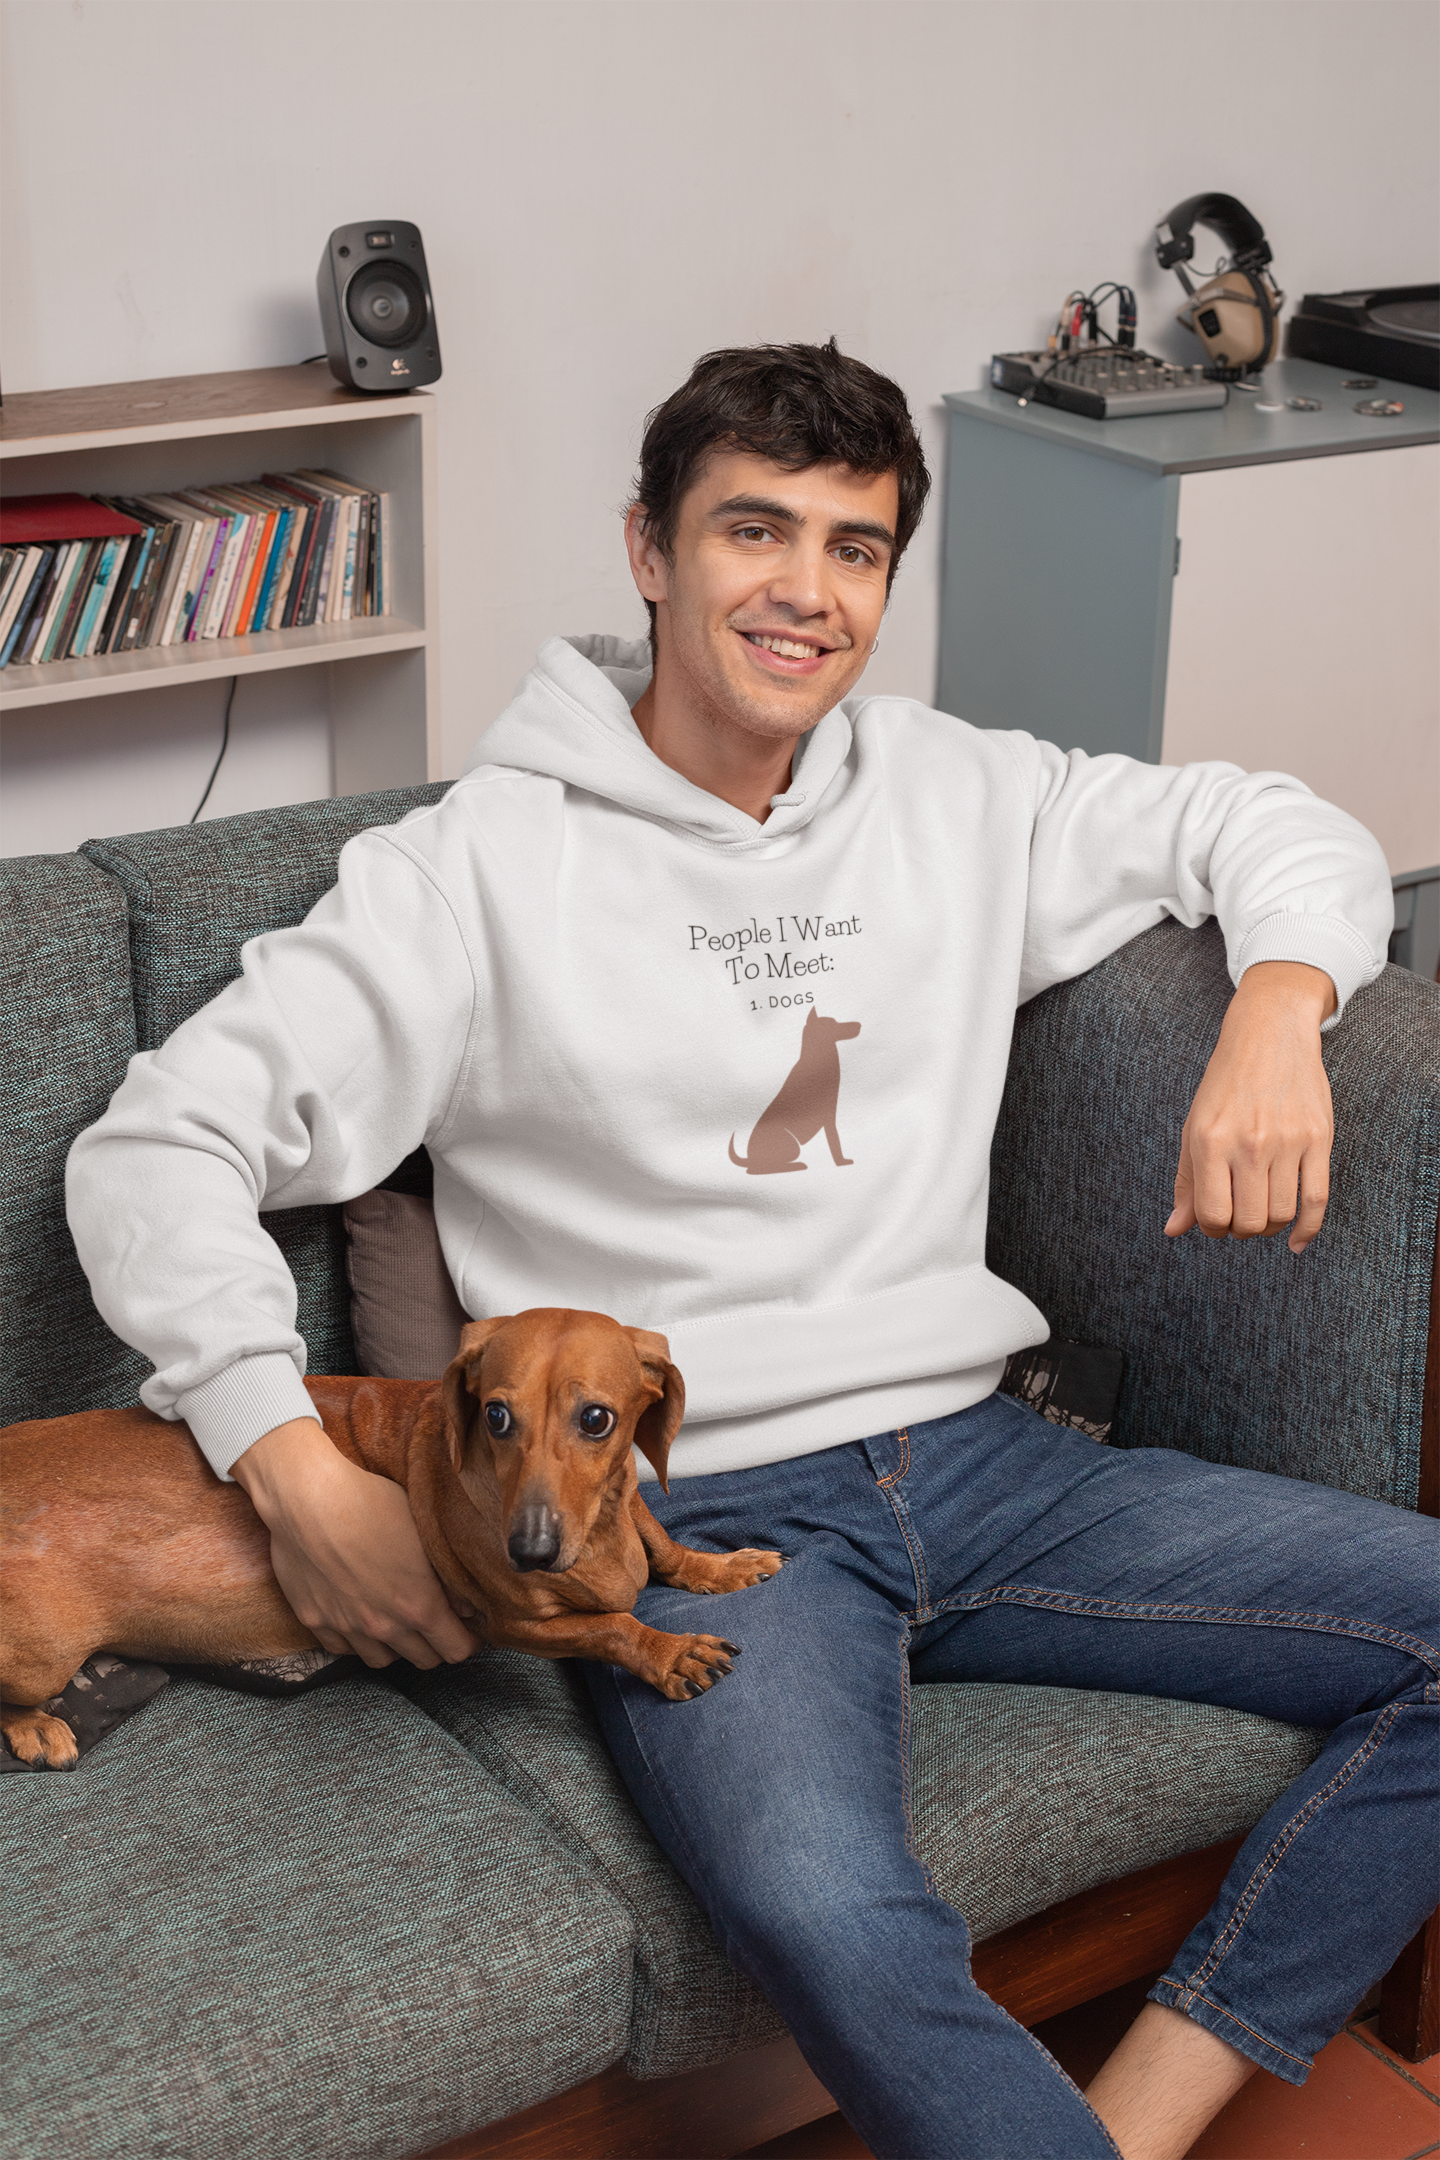 Dogs are way better than people. This funny dog hoodie is perfect for every dog lover. Designed with a high quality cotton that is extremely soft and cozy. Add this piece to your closet and watch your list of dog friends skyrocket, we promise.